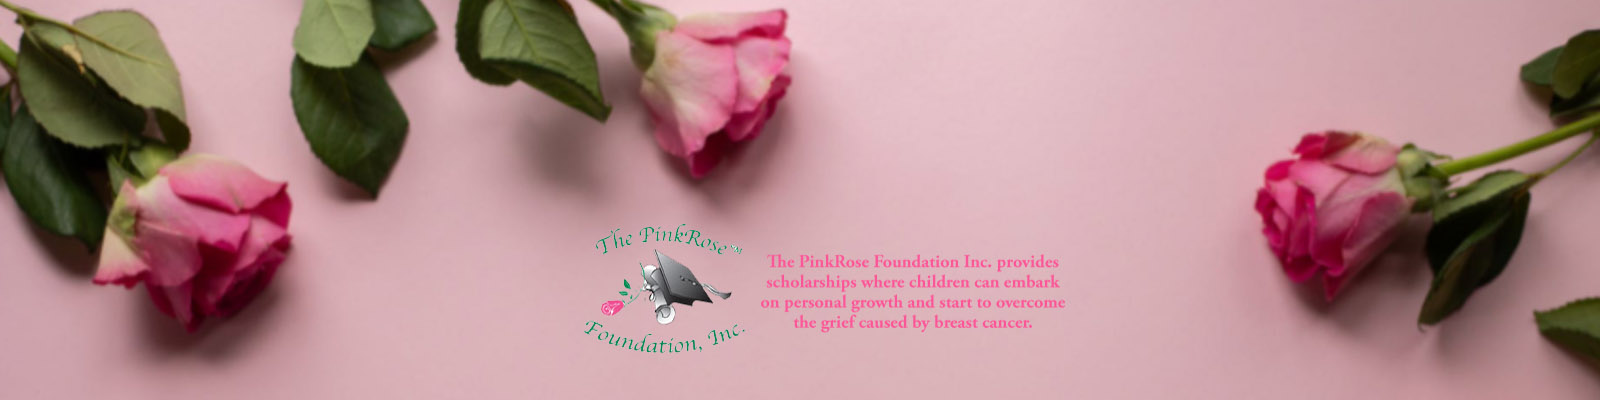 The Pink Rose Foundation, Inc.